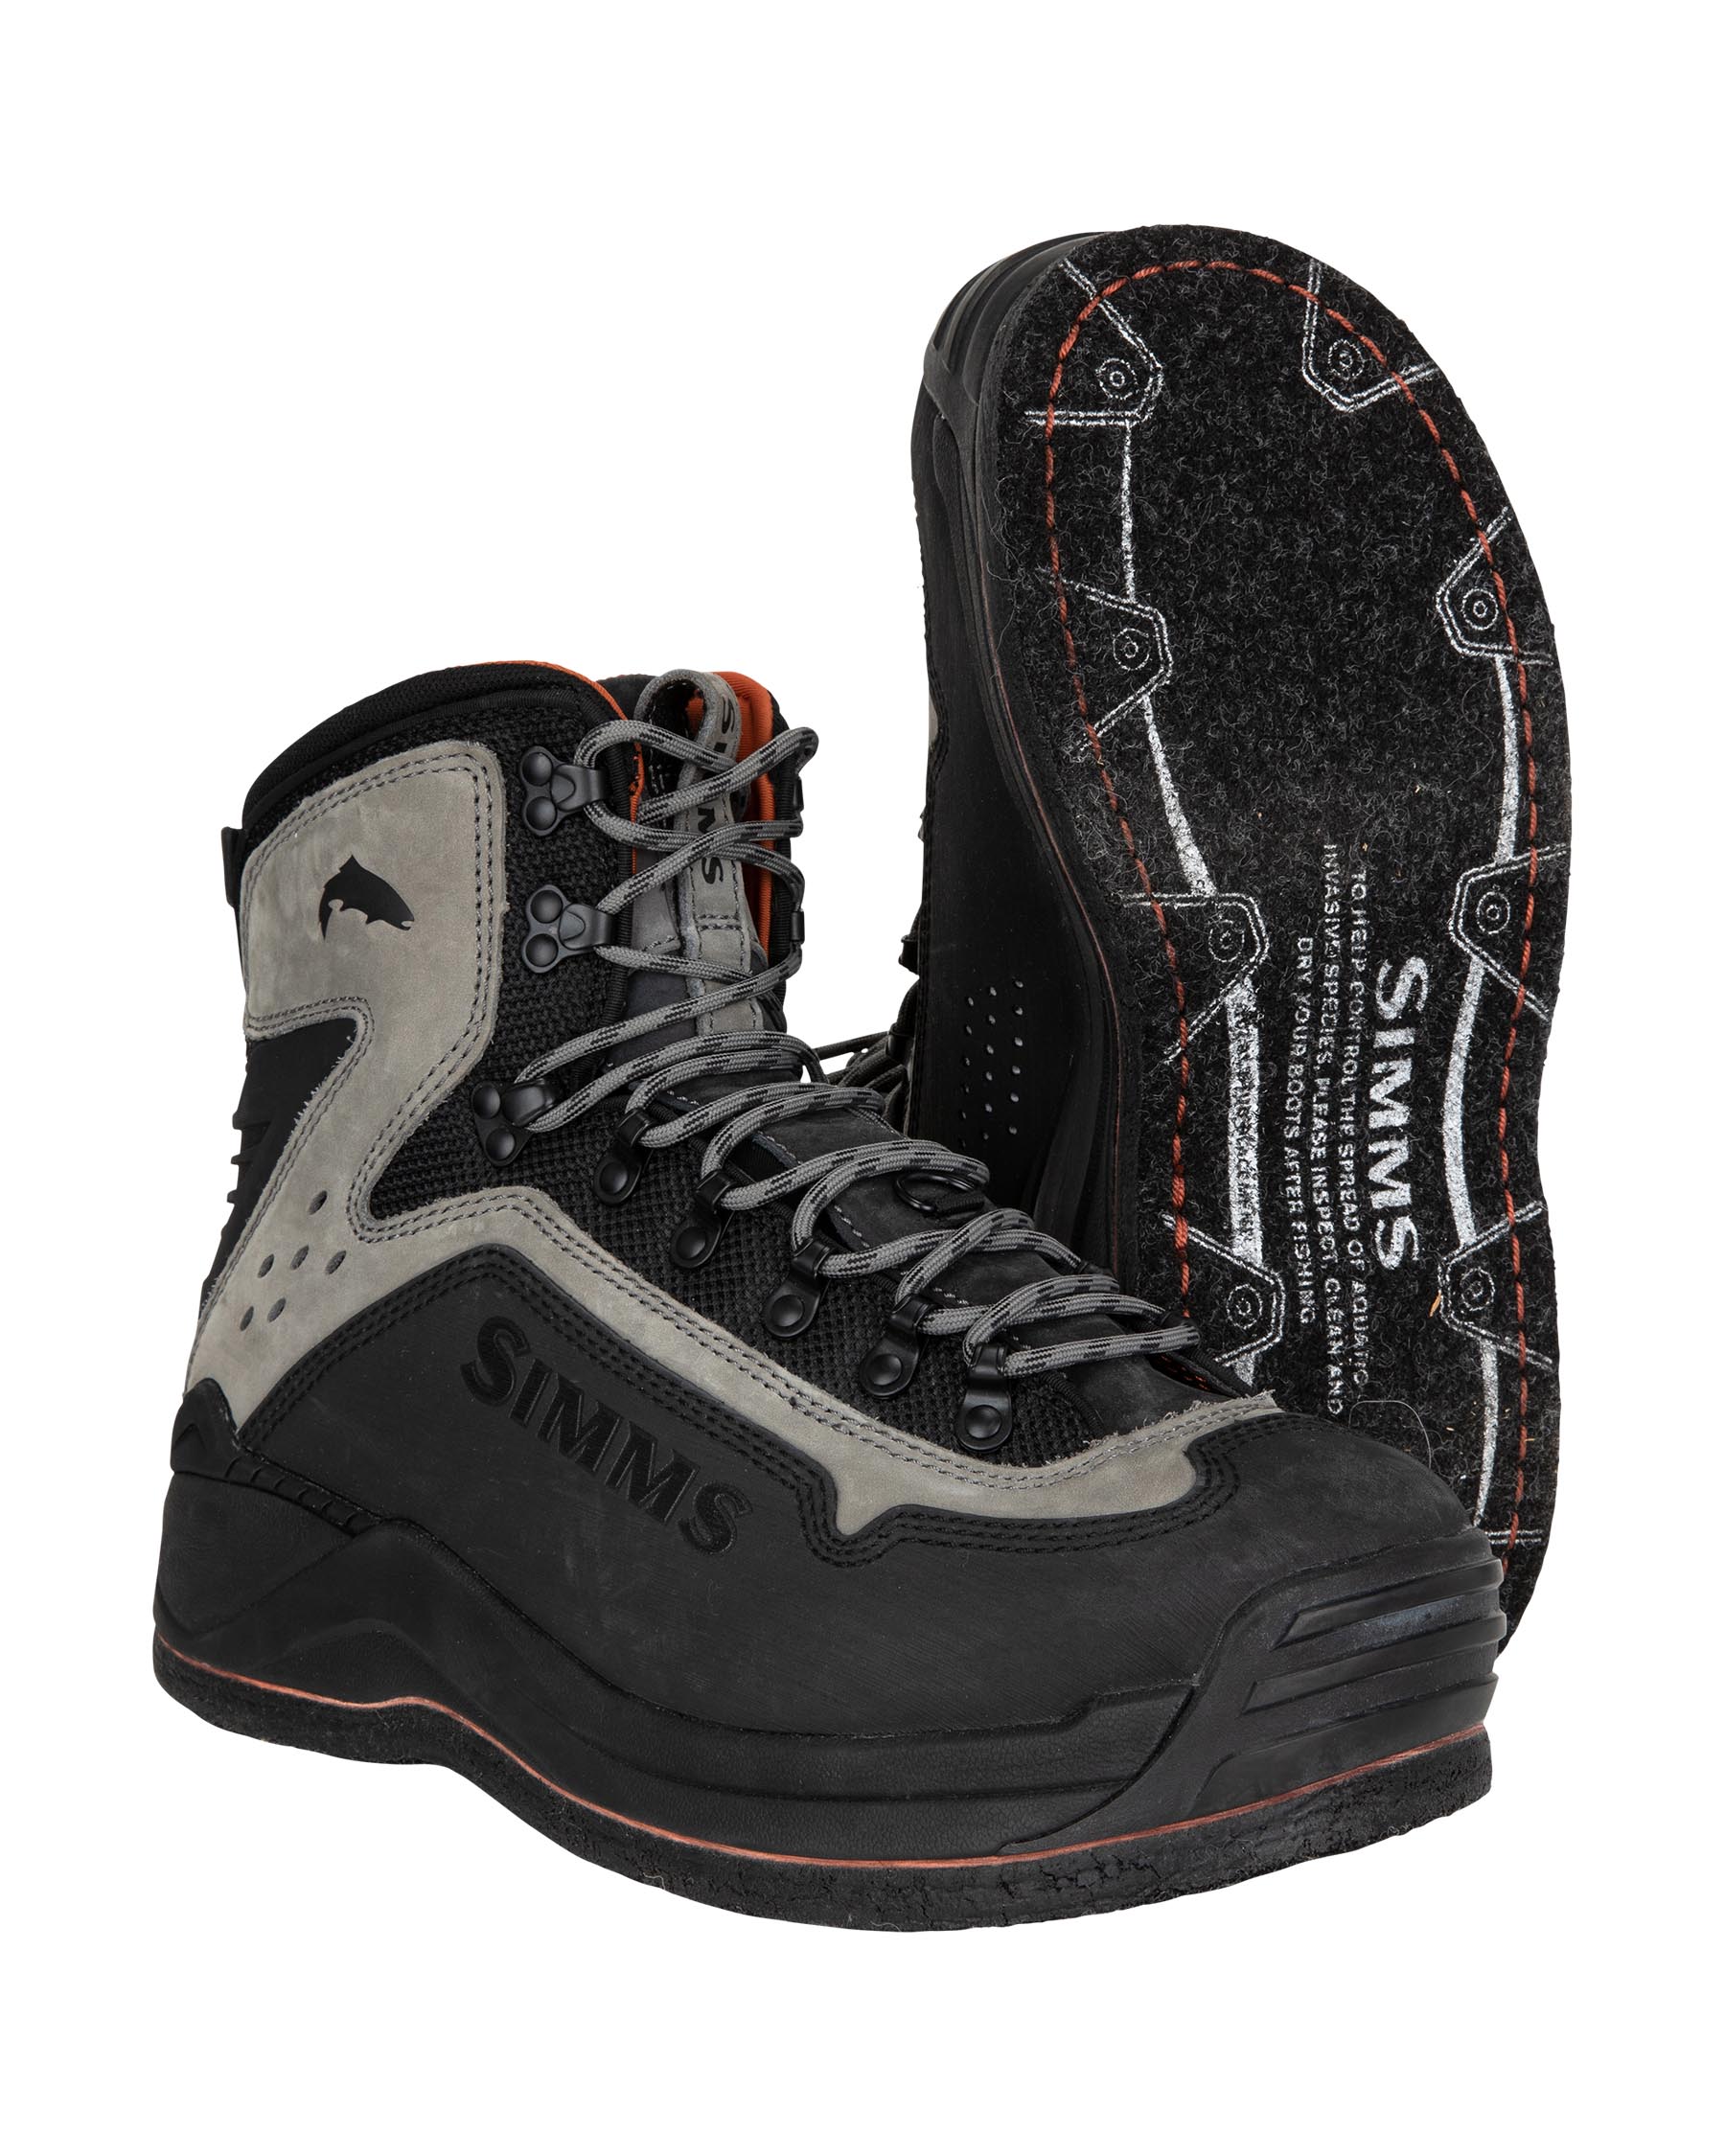 SIMMS M's G3 Guide Wading Boots - Felt Soles